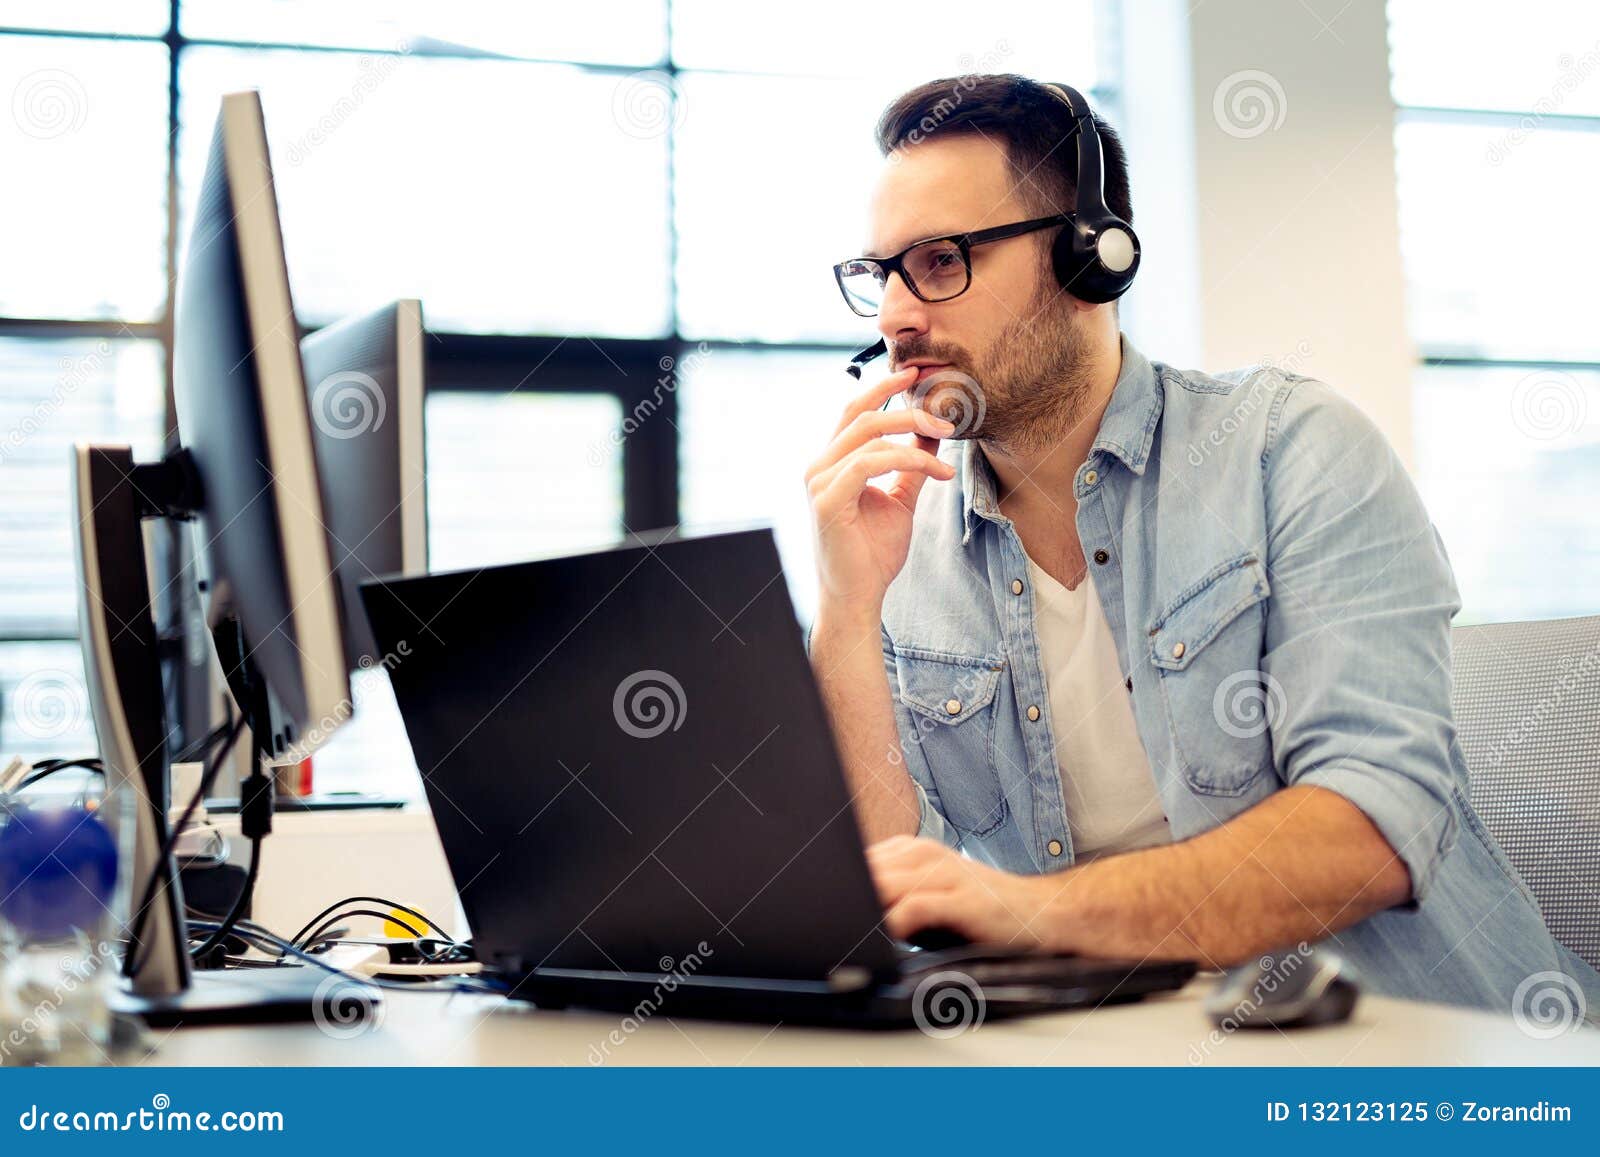 50,504 Computer Operator Stock Photos - Free & Royalty-Free Stock Photos  from Dreamstime